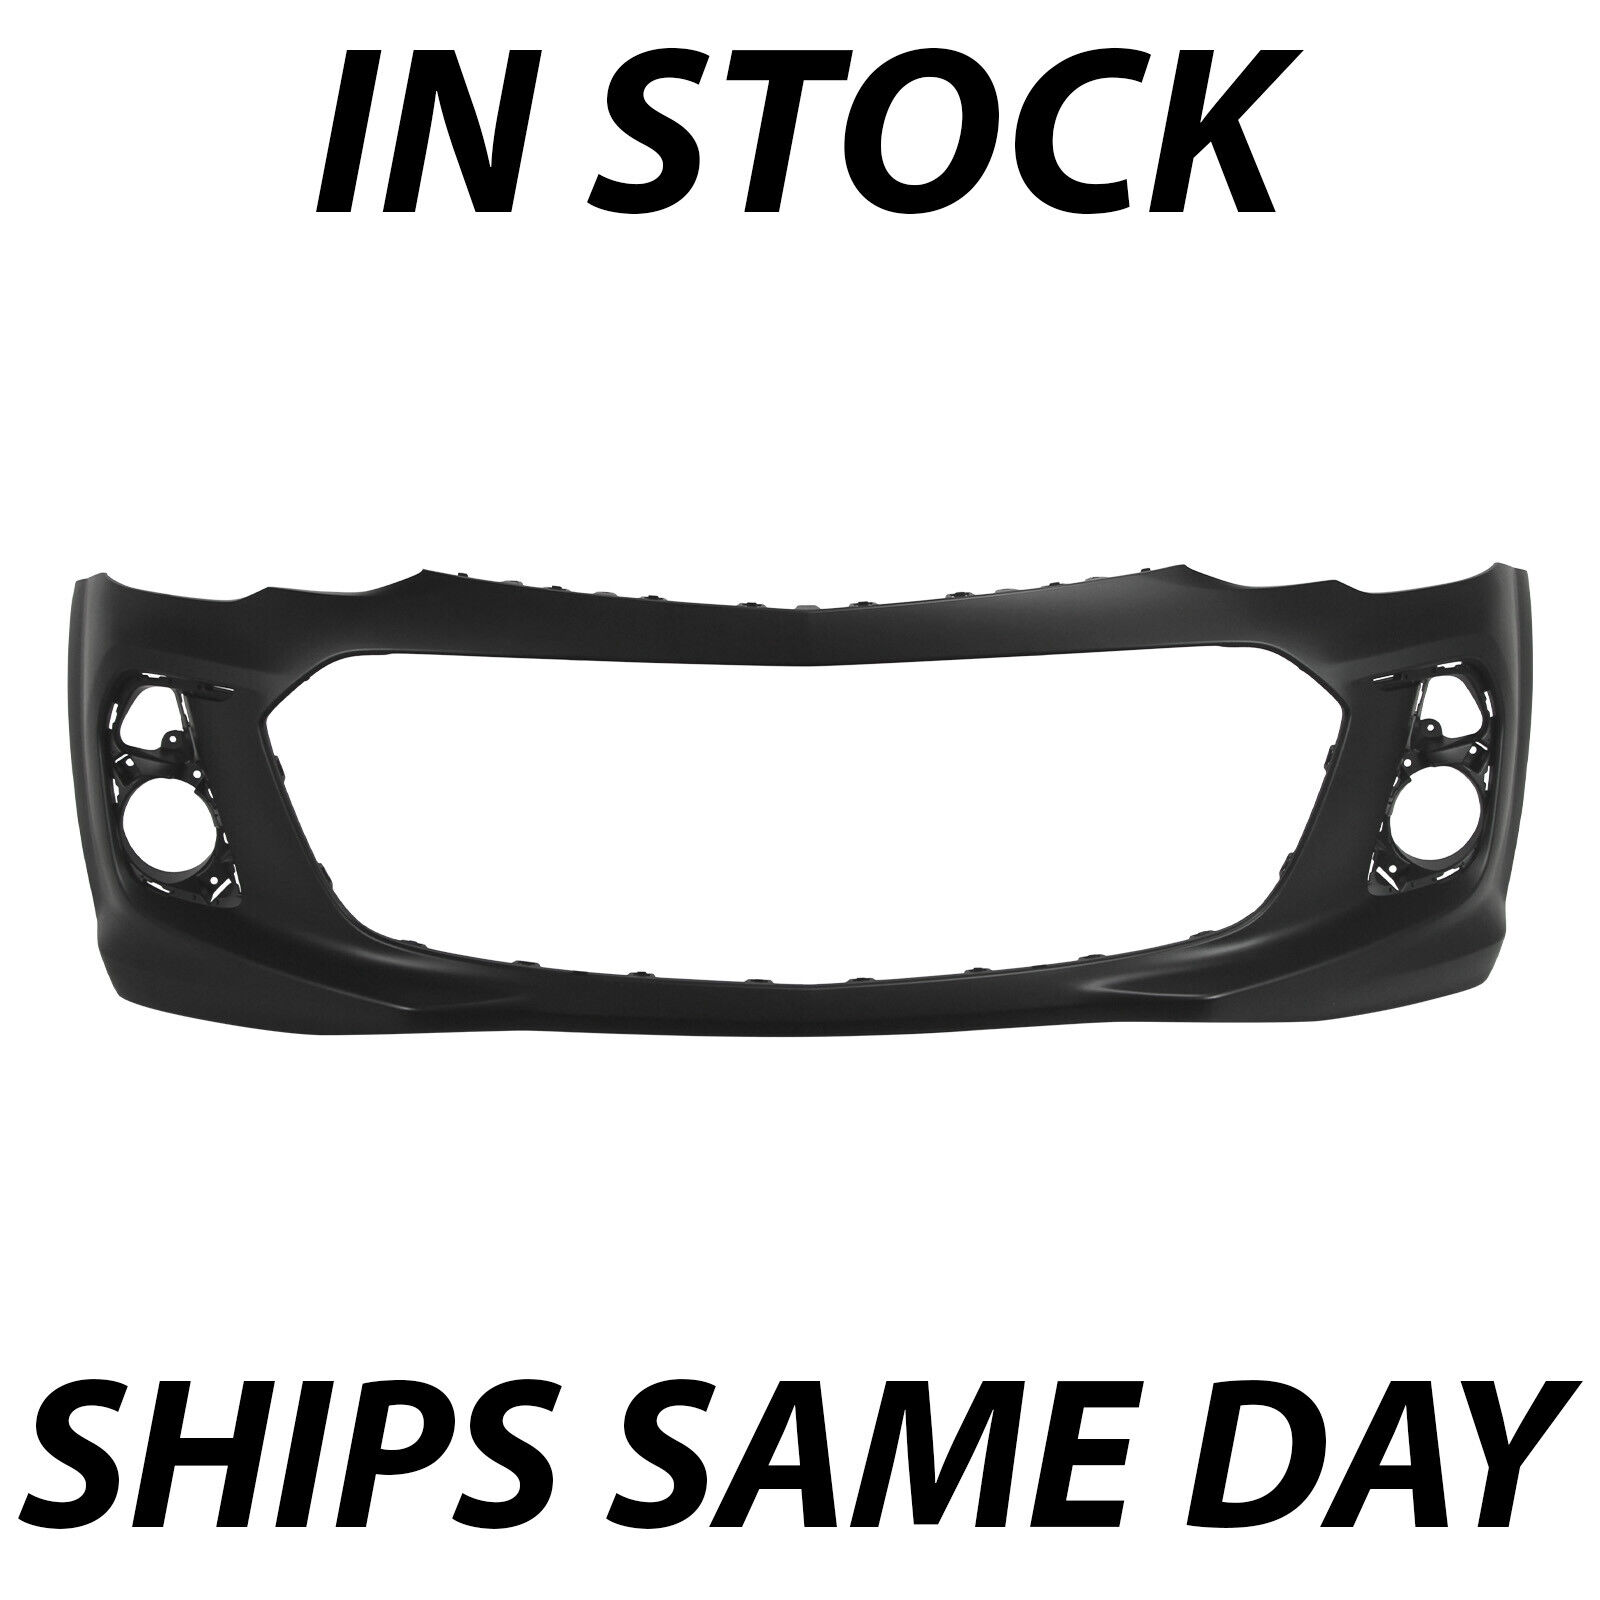 NEW Primered Front Bumper Cover Fascia for 2017-2020 Chevy Sonic RS Sedan/Hatch